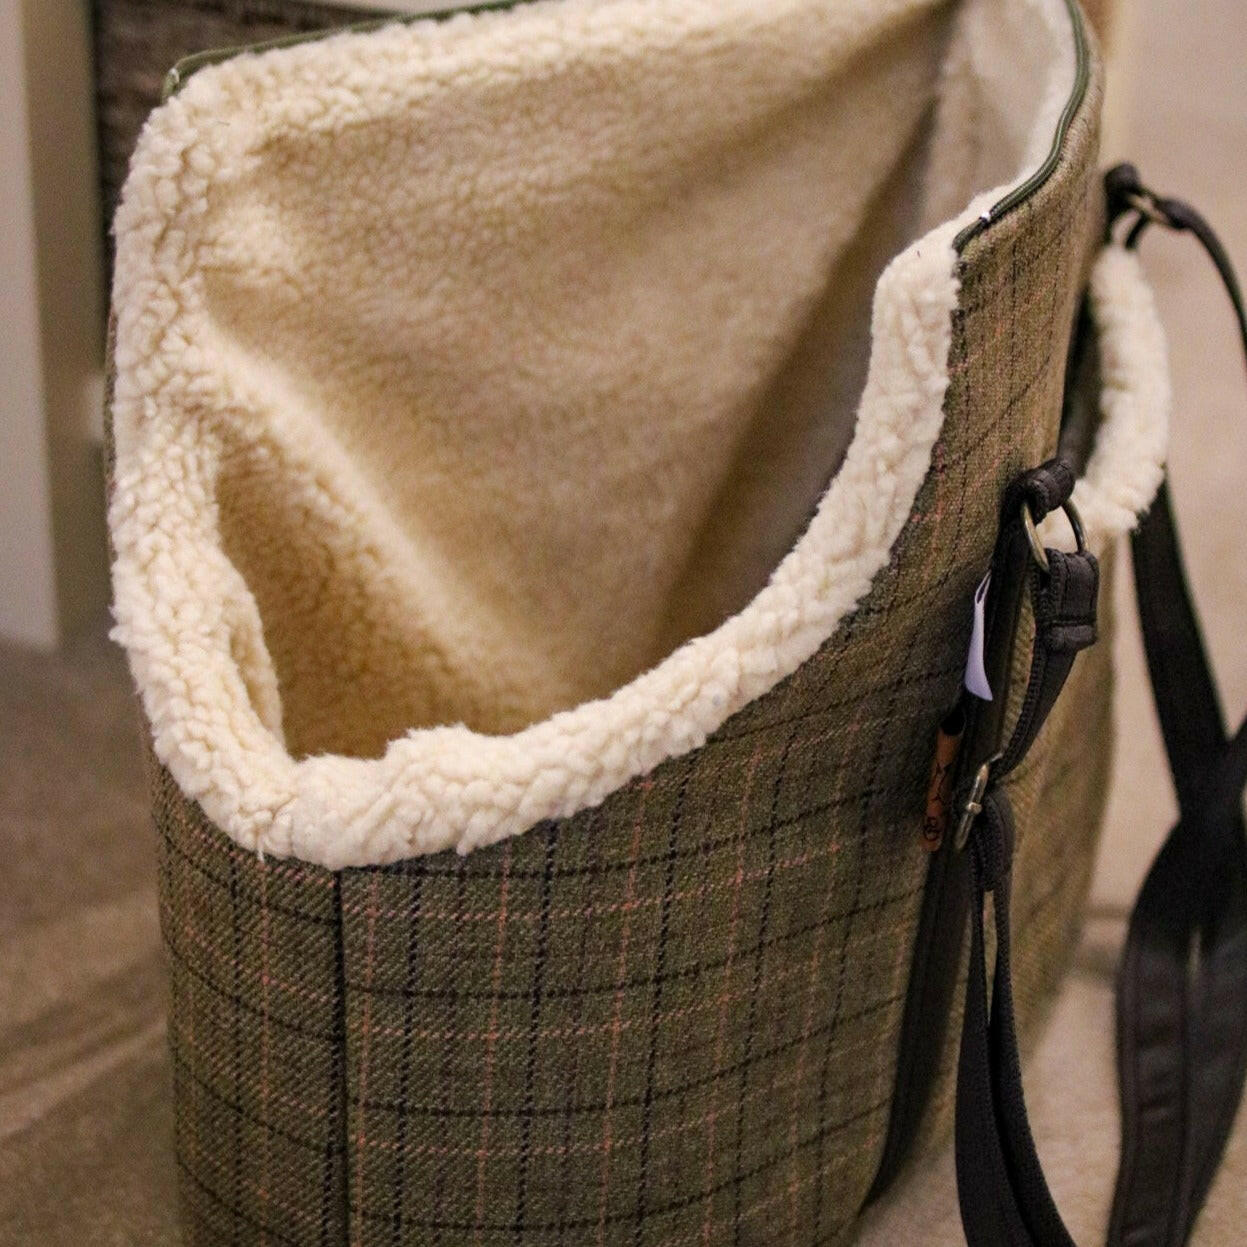 Heritage Collection Dog Carry Bags - Hugo and Ted